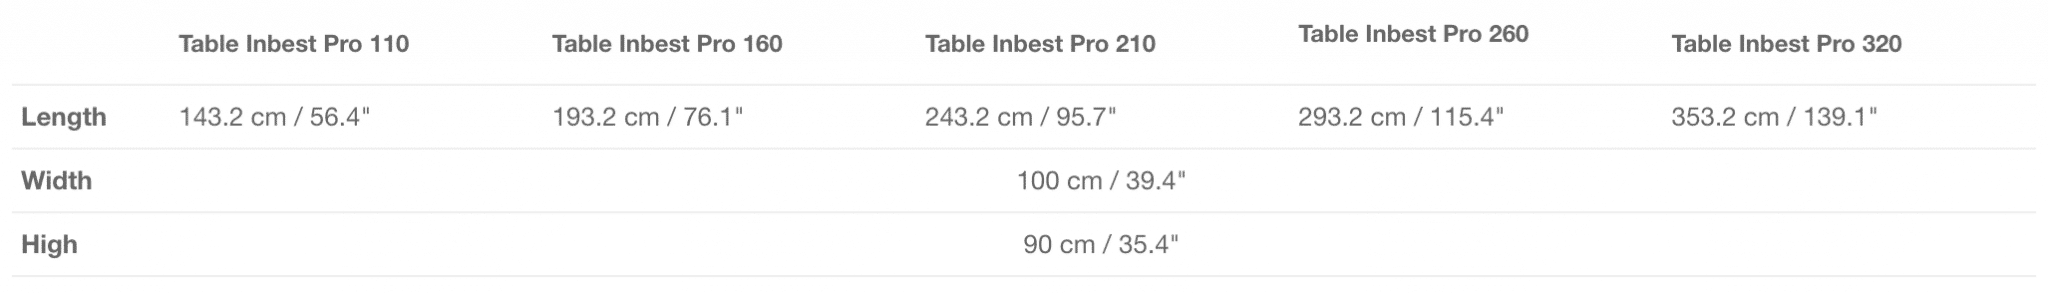 Inglet Table for the Inbest Screenshot 2021 09 08 at 14.35.23 vikiallo